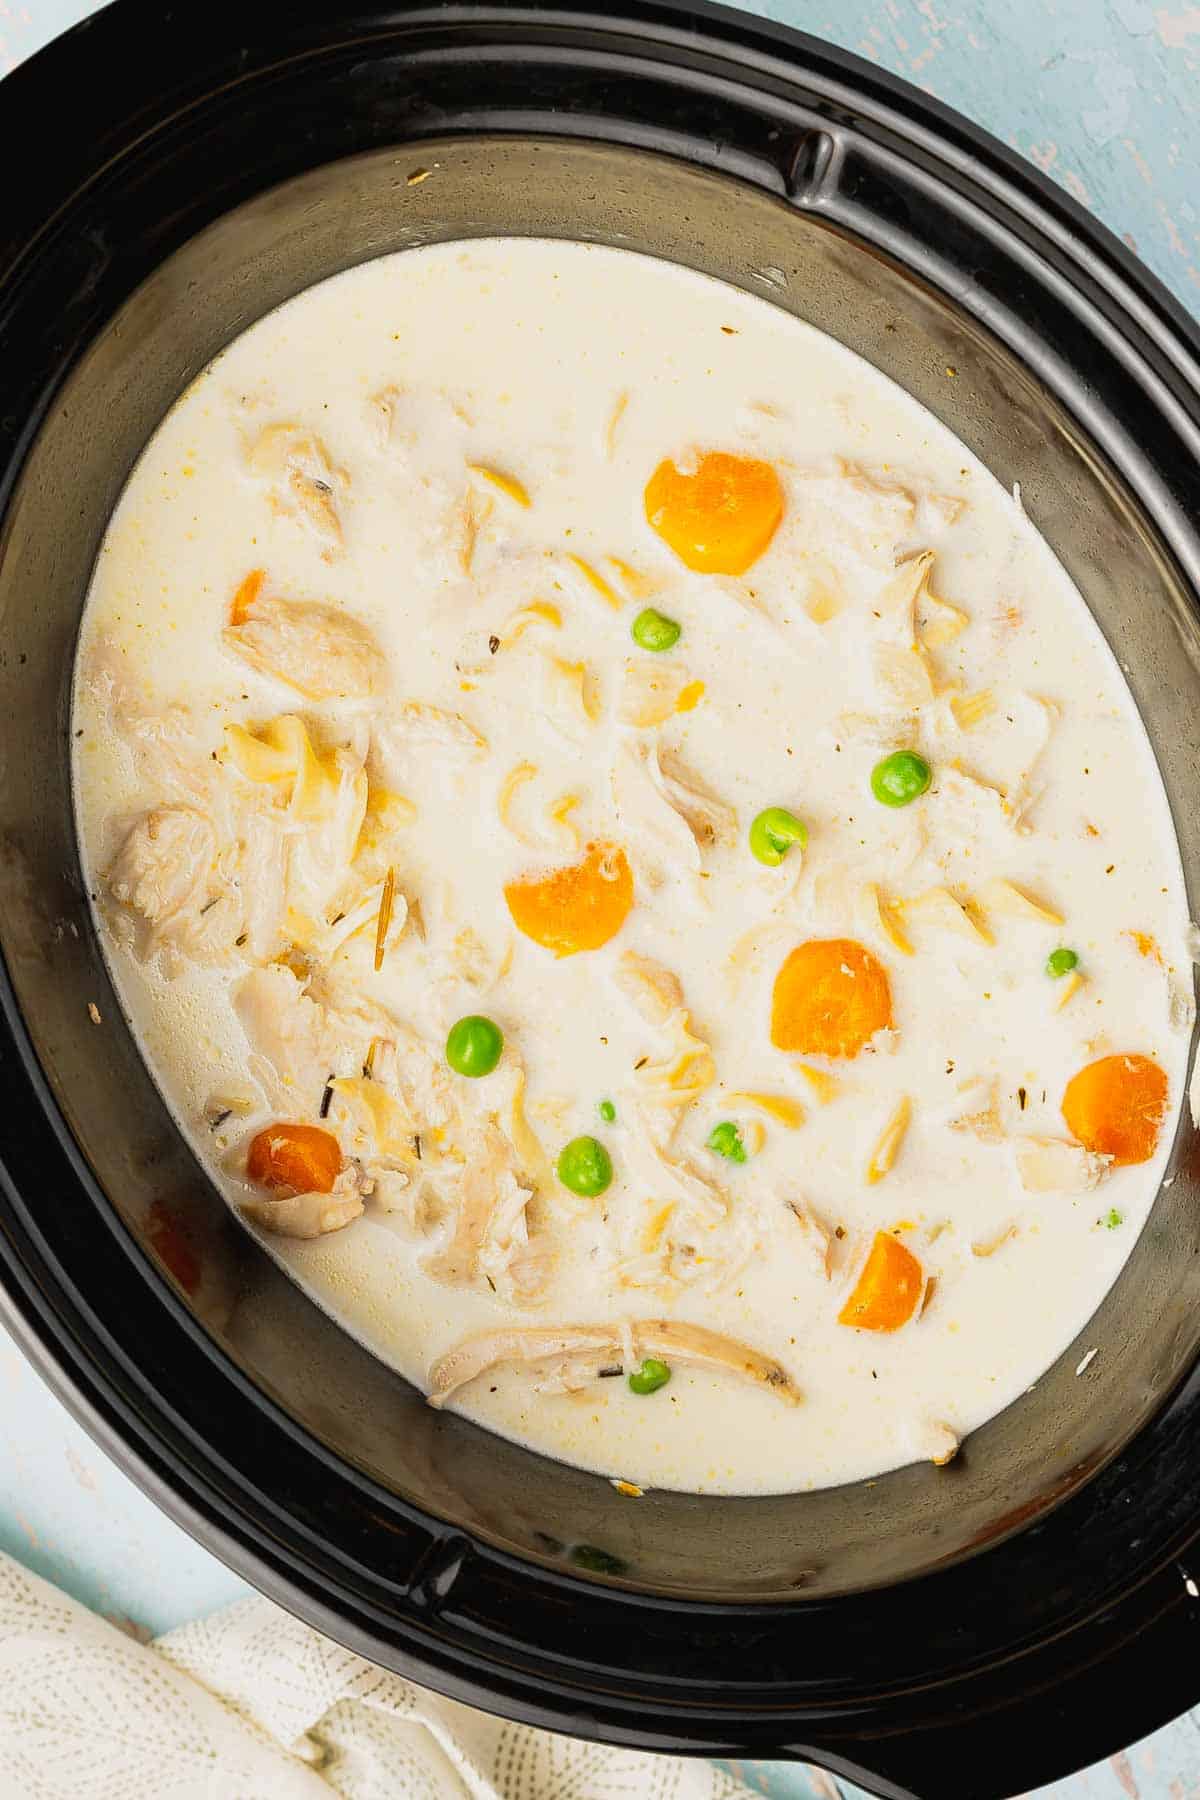 Crock Pot Creamy Chicken Noodle Soup is a hearty soup loaded with shredded chicken, veggies and egg noodles all in a creamy chicken chicken broth.